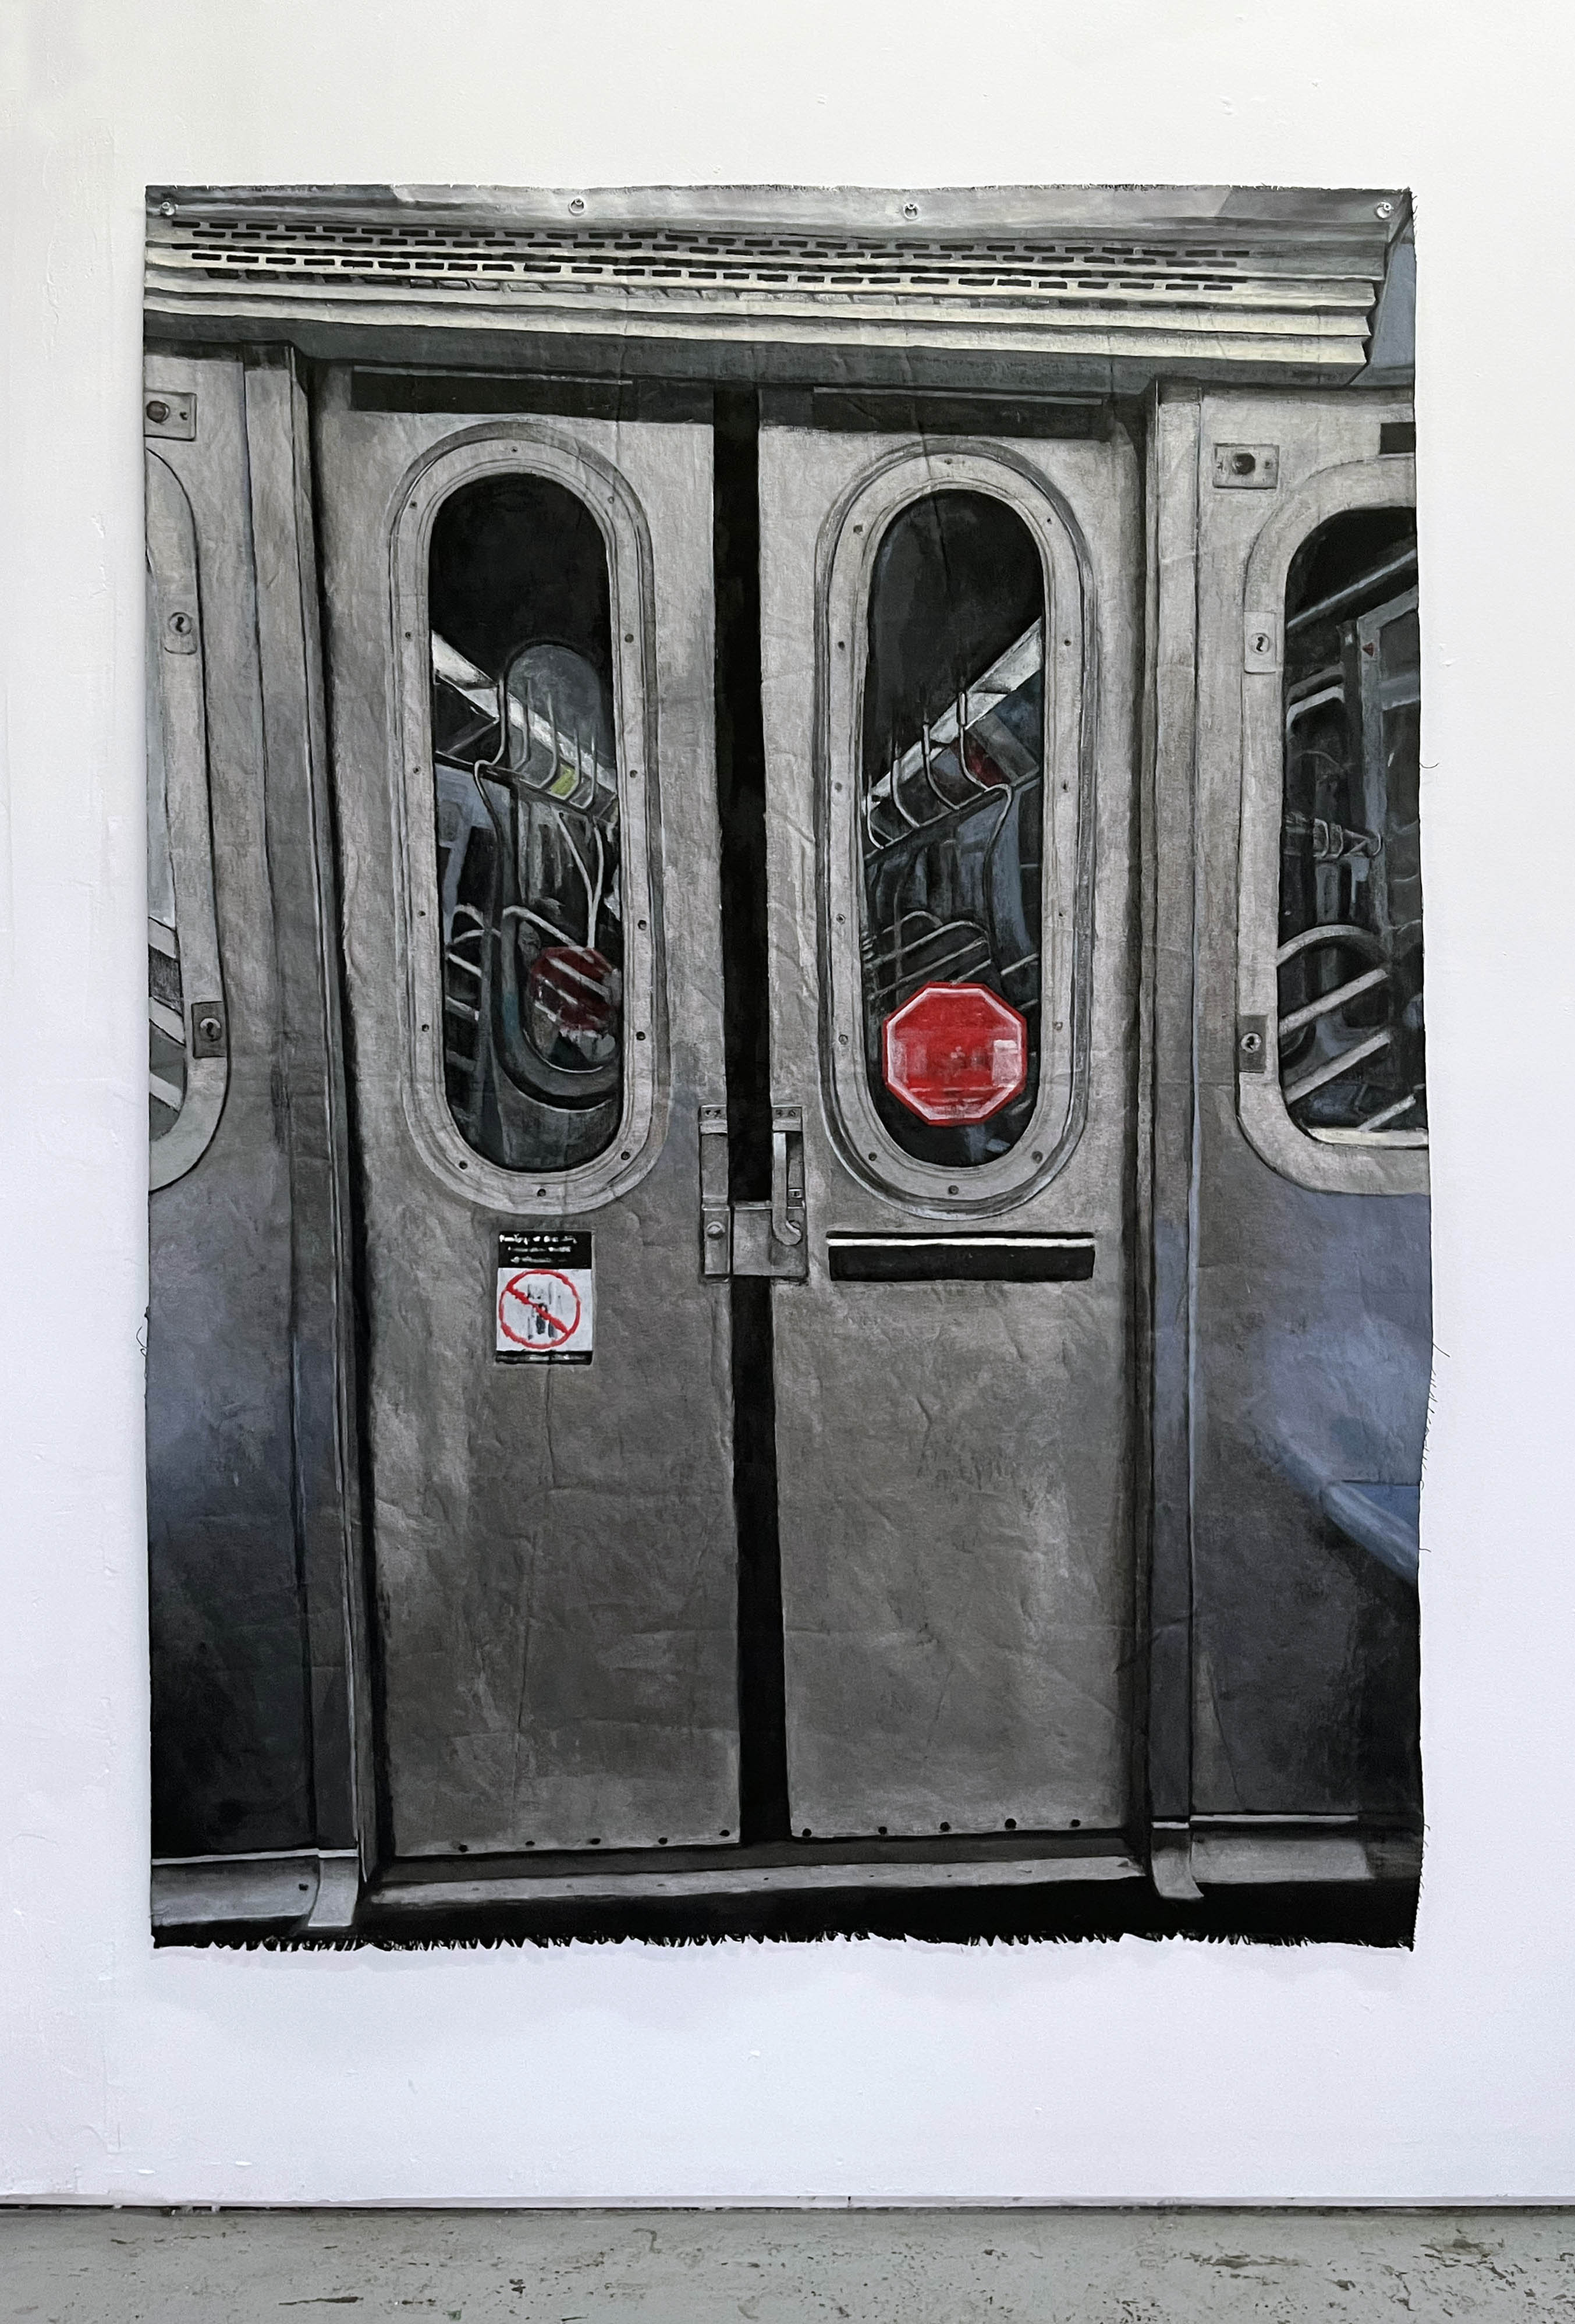 Realistically painted view from inside the NYC subway of the subway doors between trains